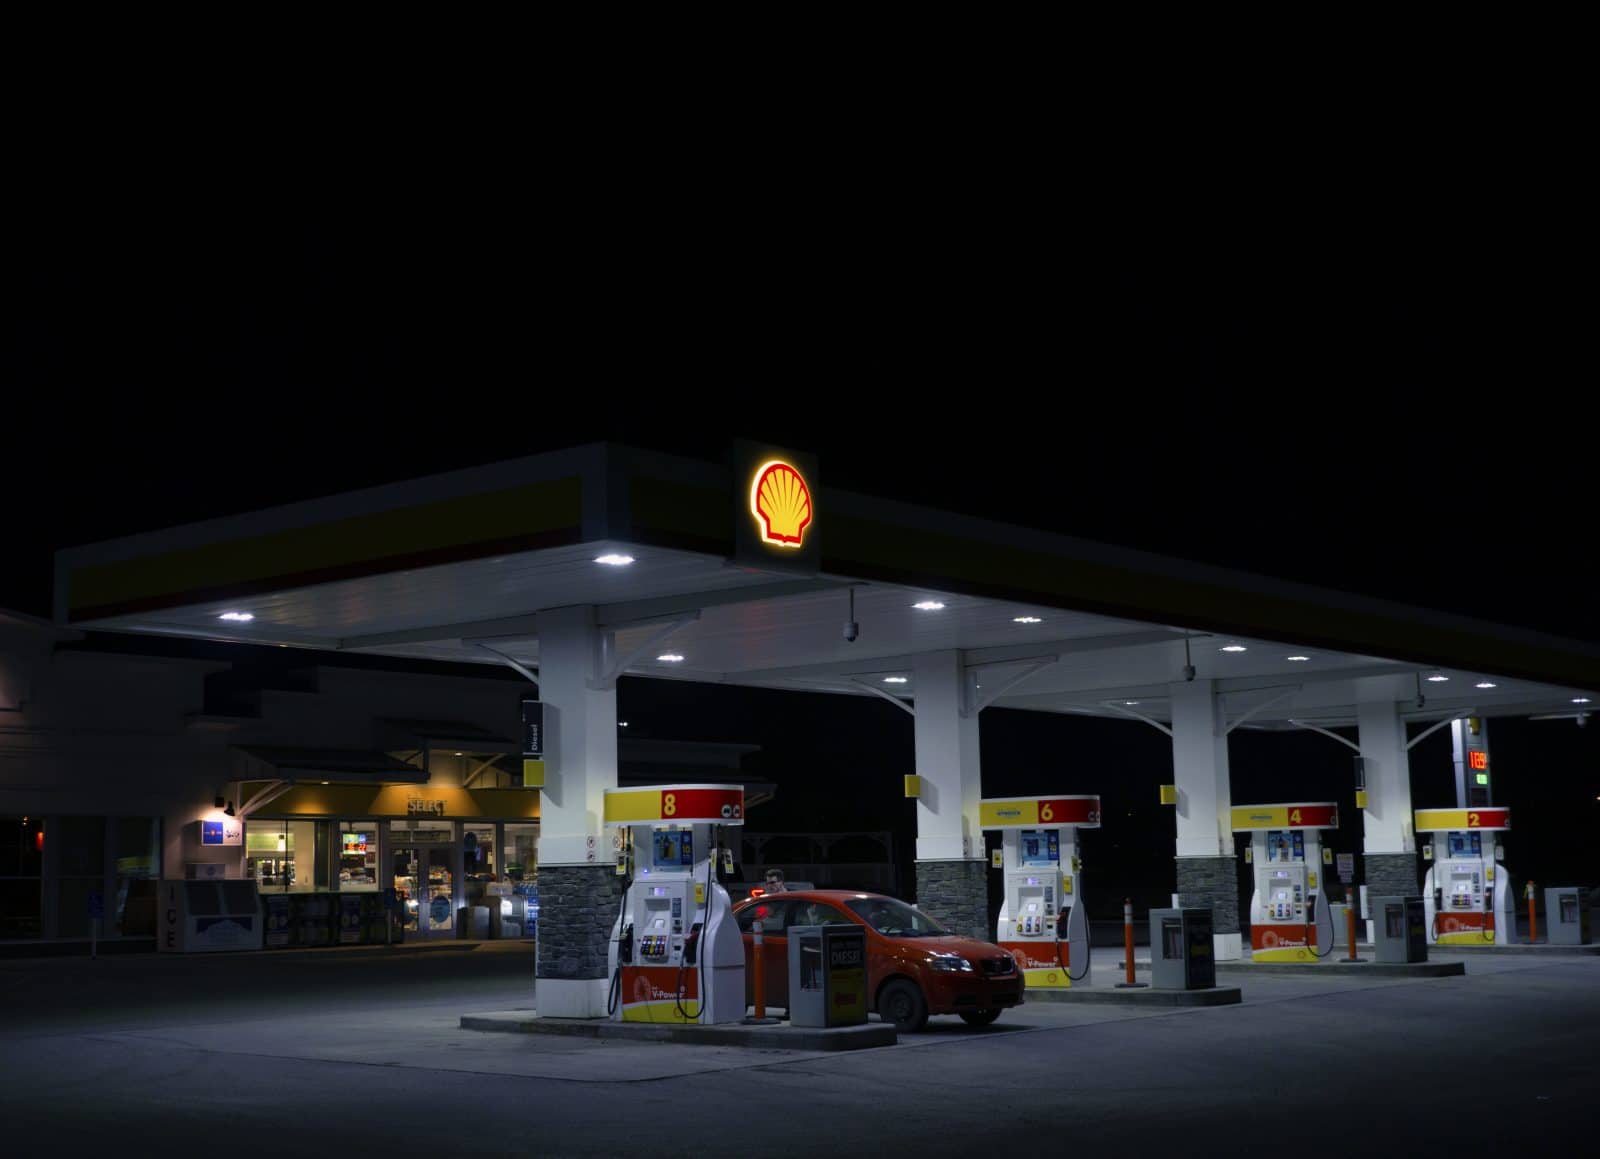 The fuel crisis is over, but your local gas station may still be running on empty